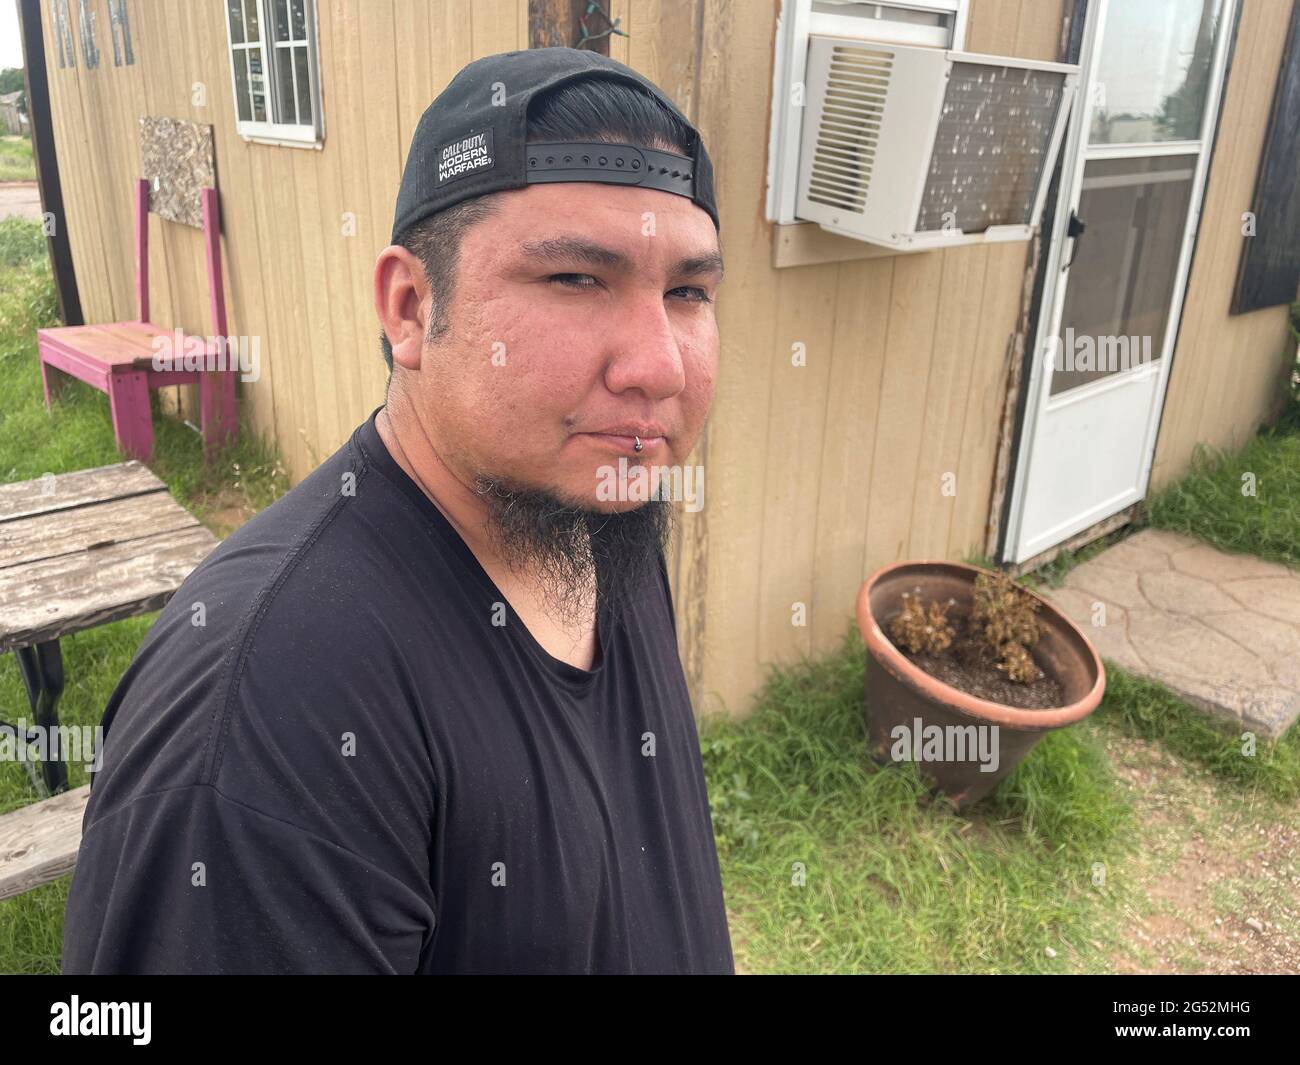 Nick Honesto, who says he will not receive a coronavirus disease (COVID-19) vaccine due to his vaccine hesitancy, poses for a photo in Morton, Texas, U.S., June 23, 2021. Picture taken June 23, 2021. REUTERS/Brad Brooks Stock Photo